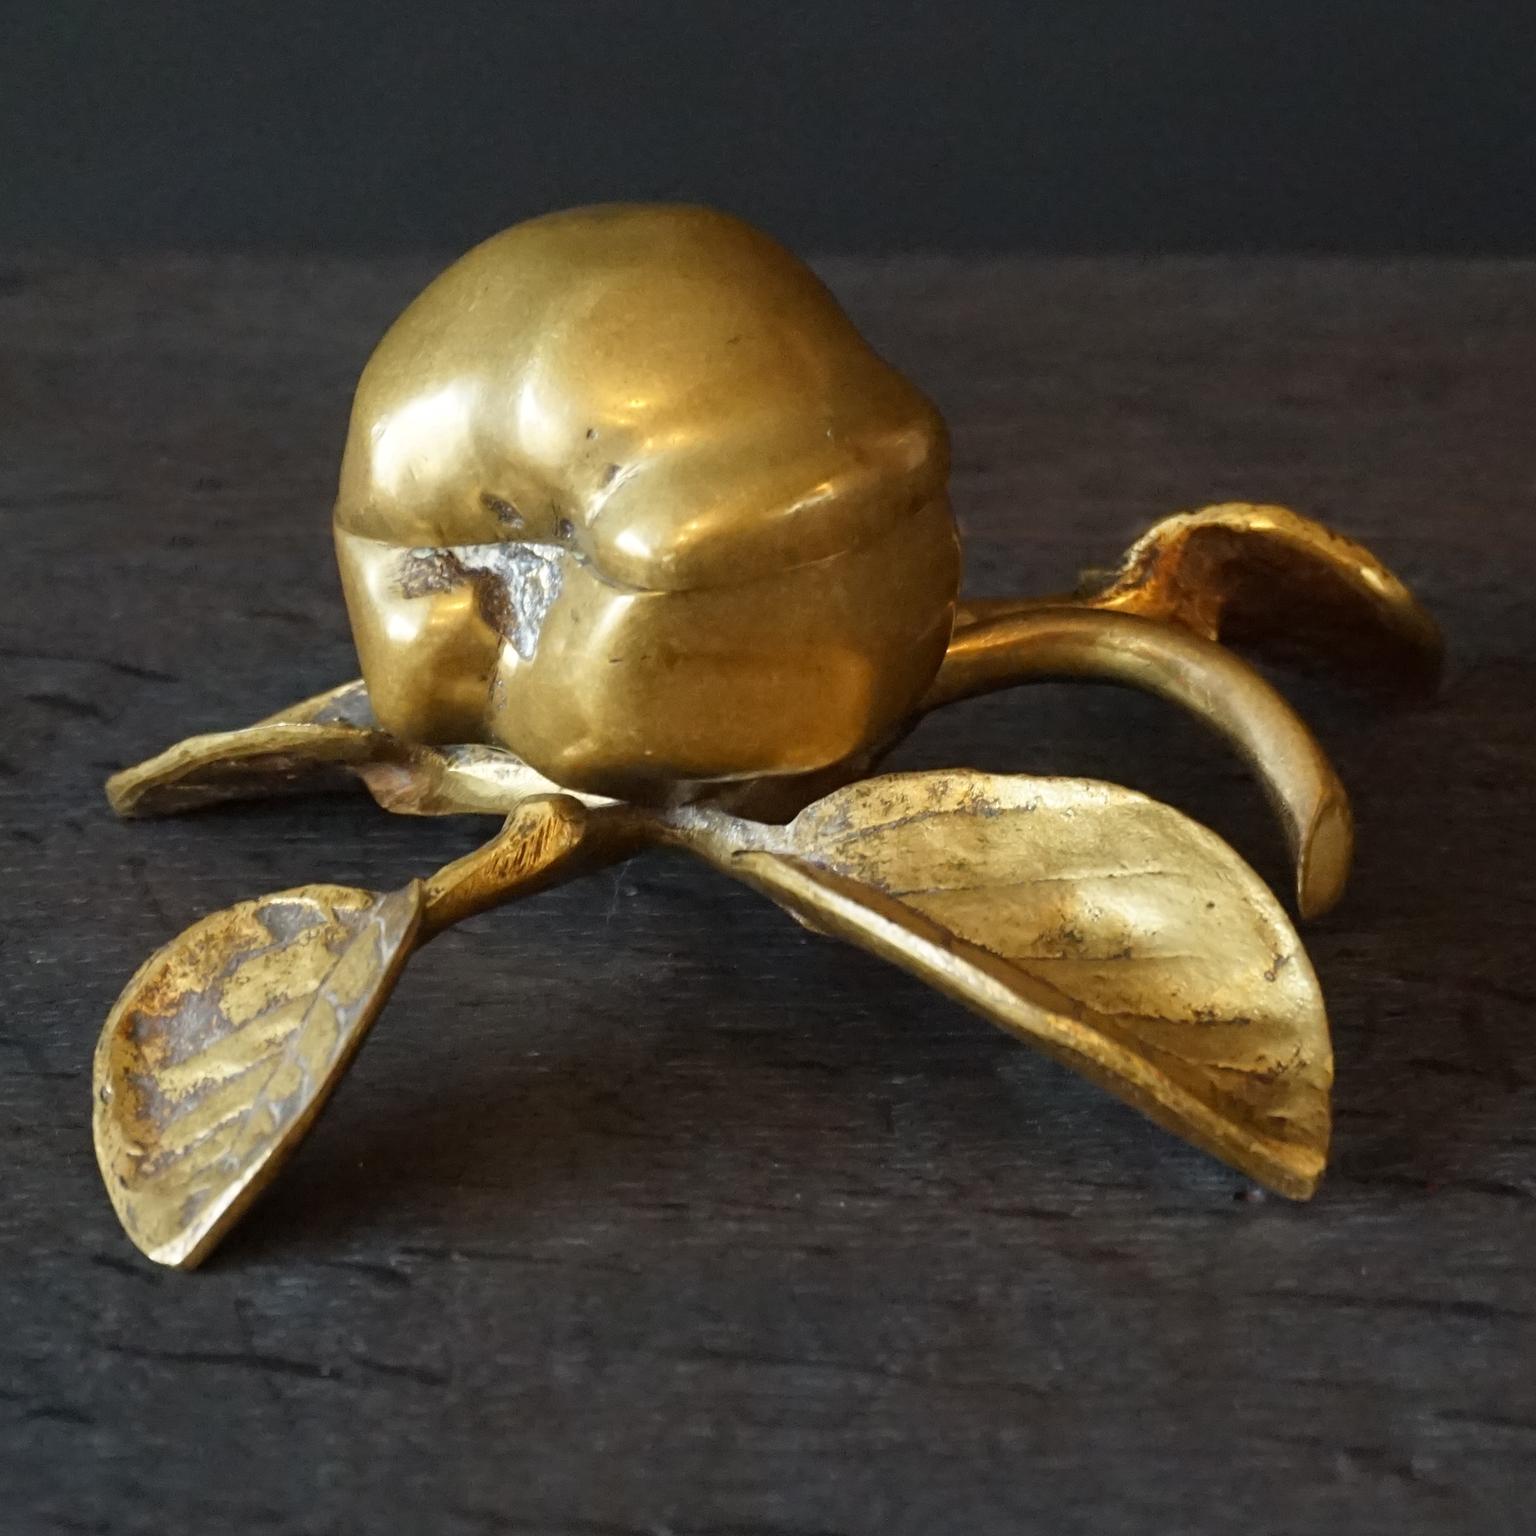 Antique hinged bronze painted and patinated apple on a twig with leaves, to keep or collect your little trinkets in.
This used to be called a bed-apple, for putting your jewellery in on your nightstand before going to bed. But evidently they also